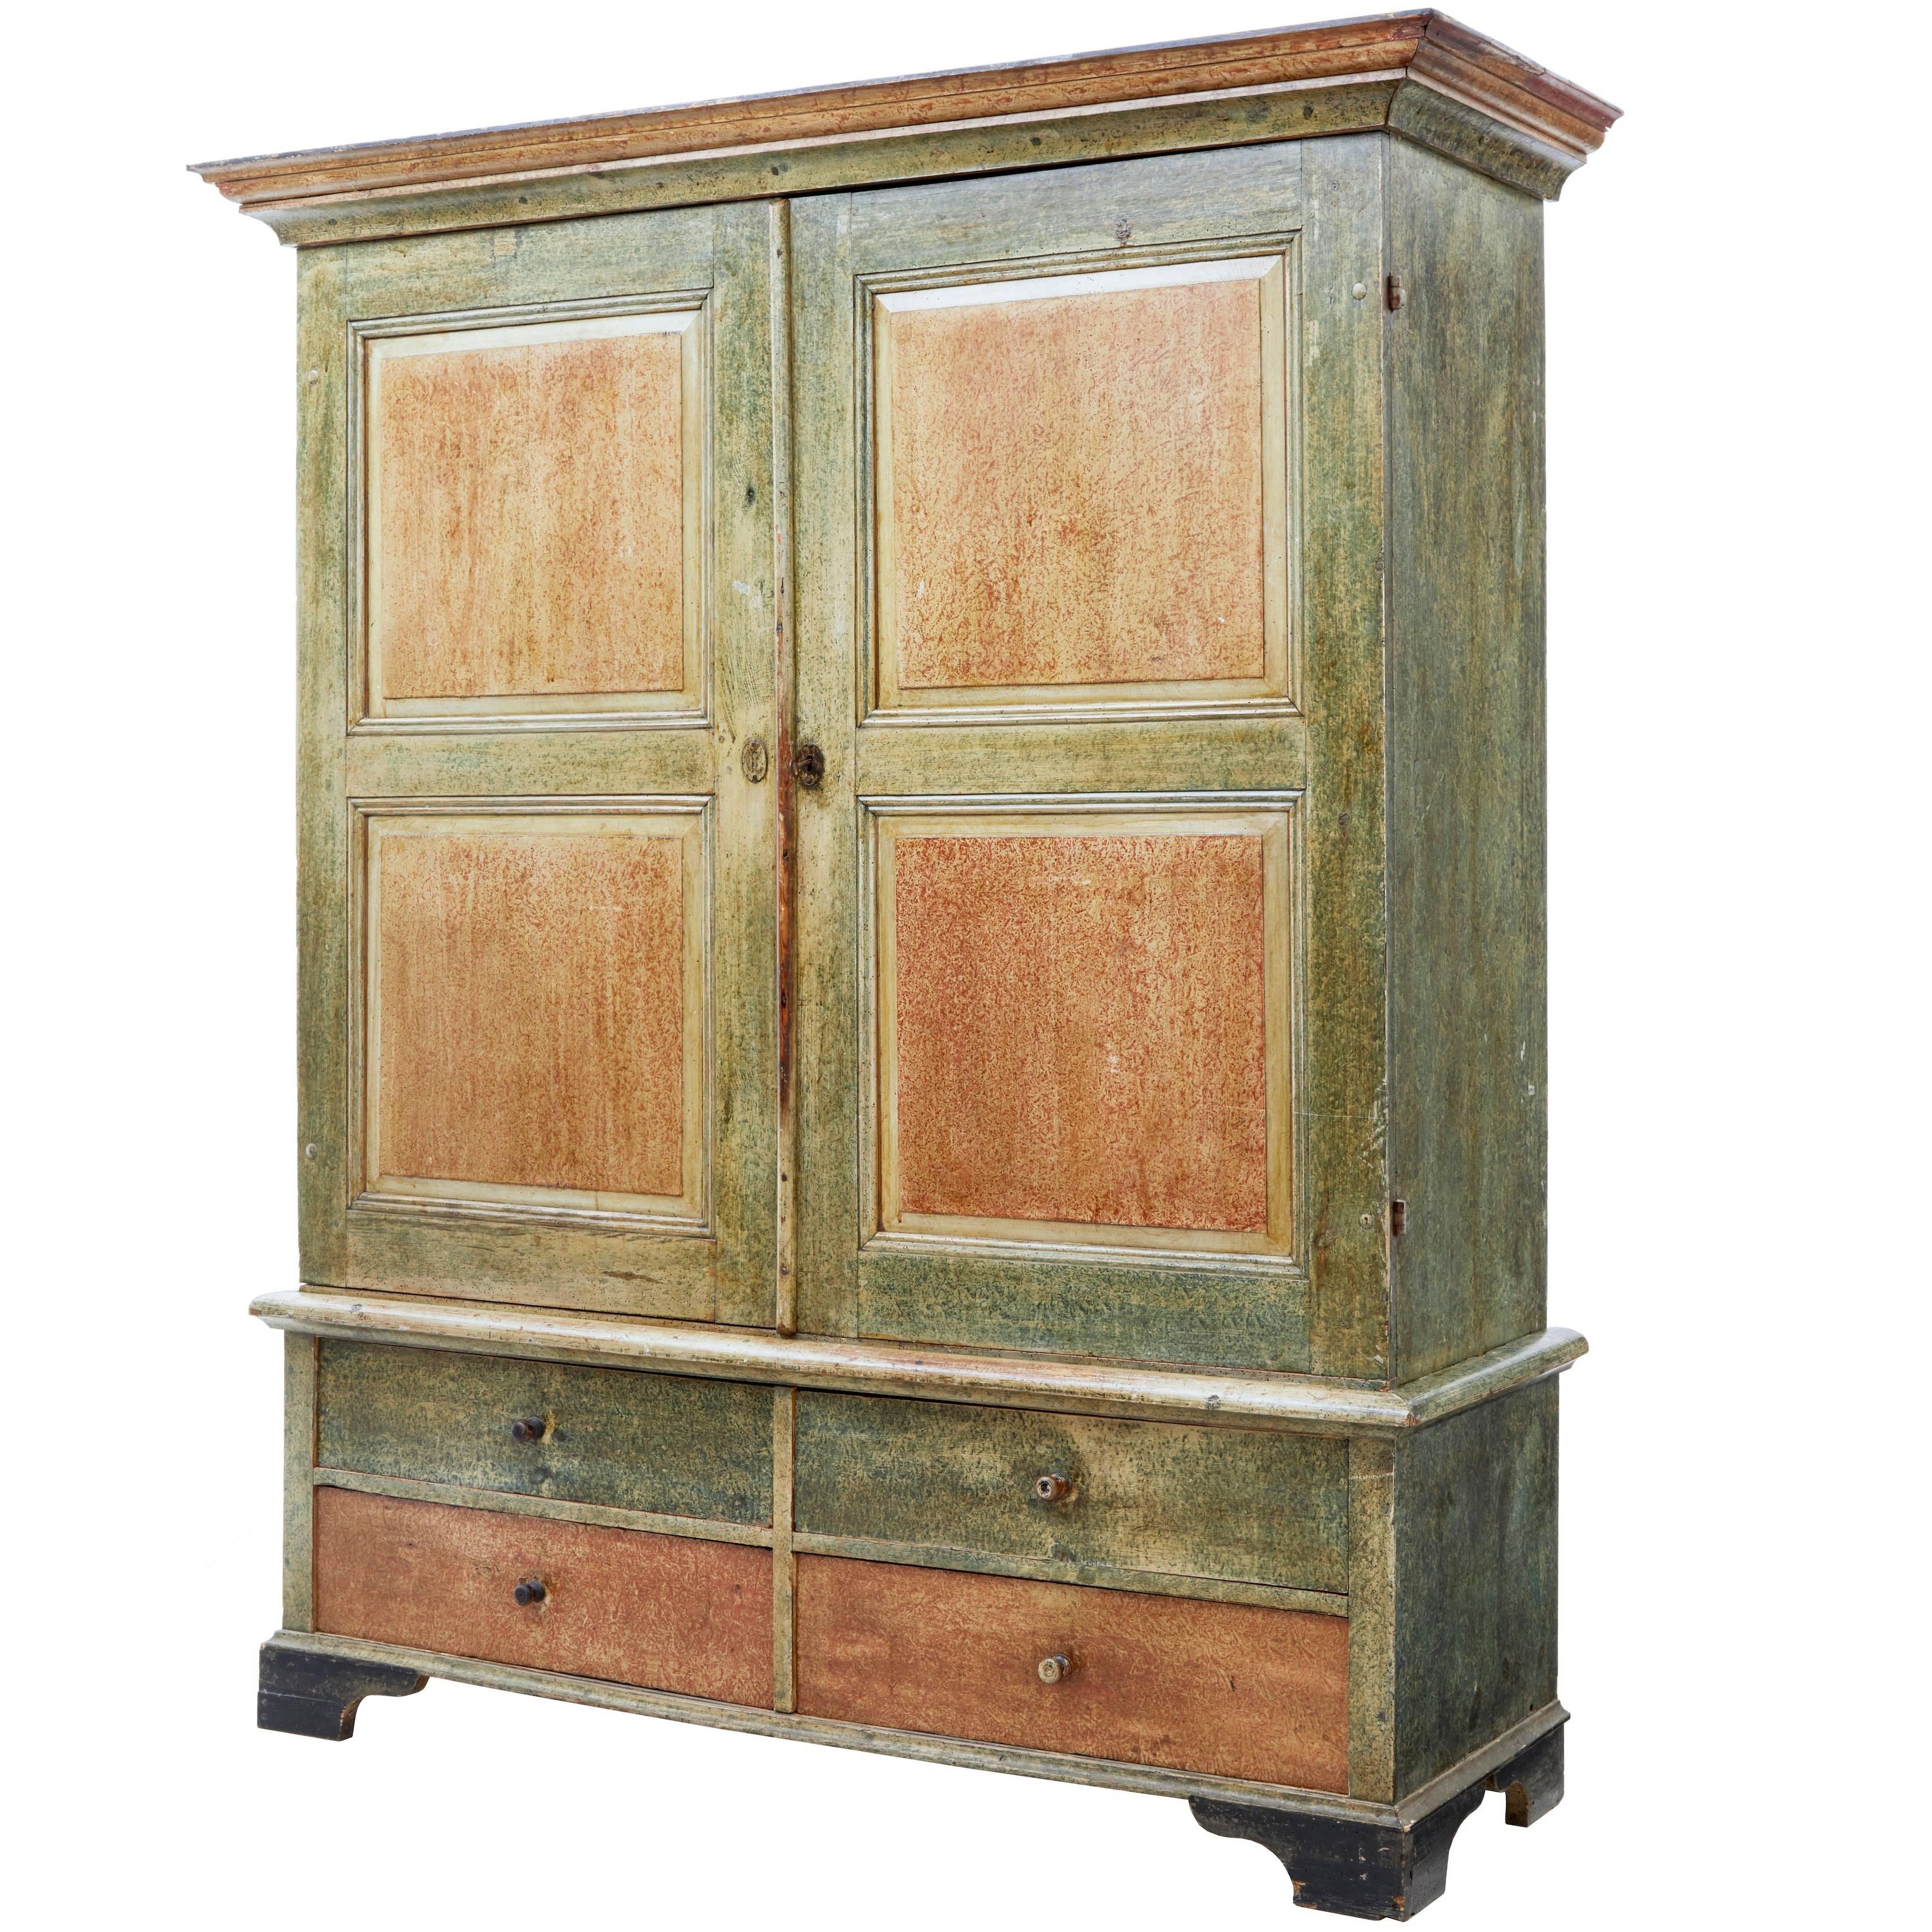 19th Century Rustic Swedish Pine Ragwork Painted Cabinet on Chest